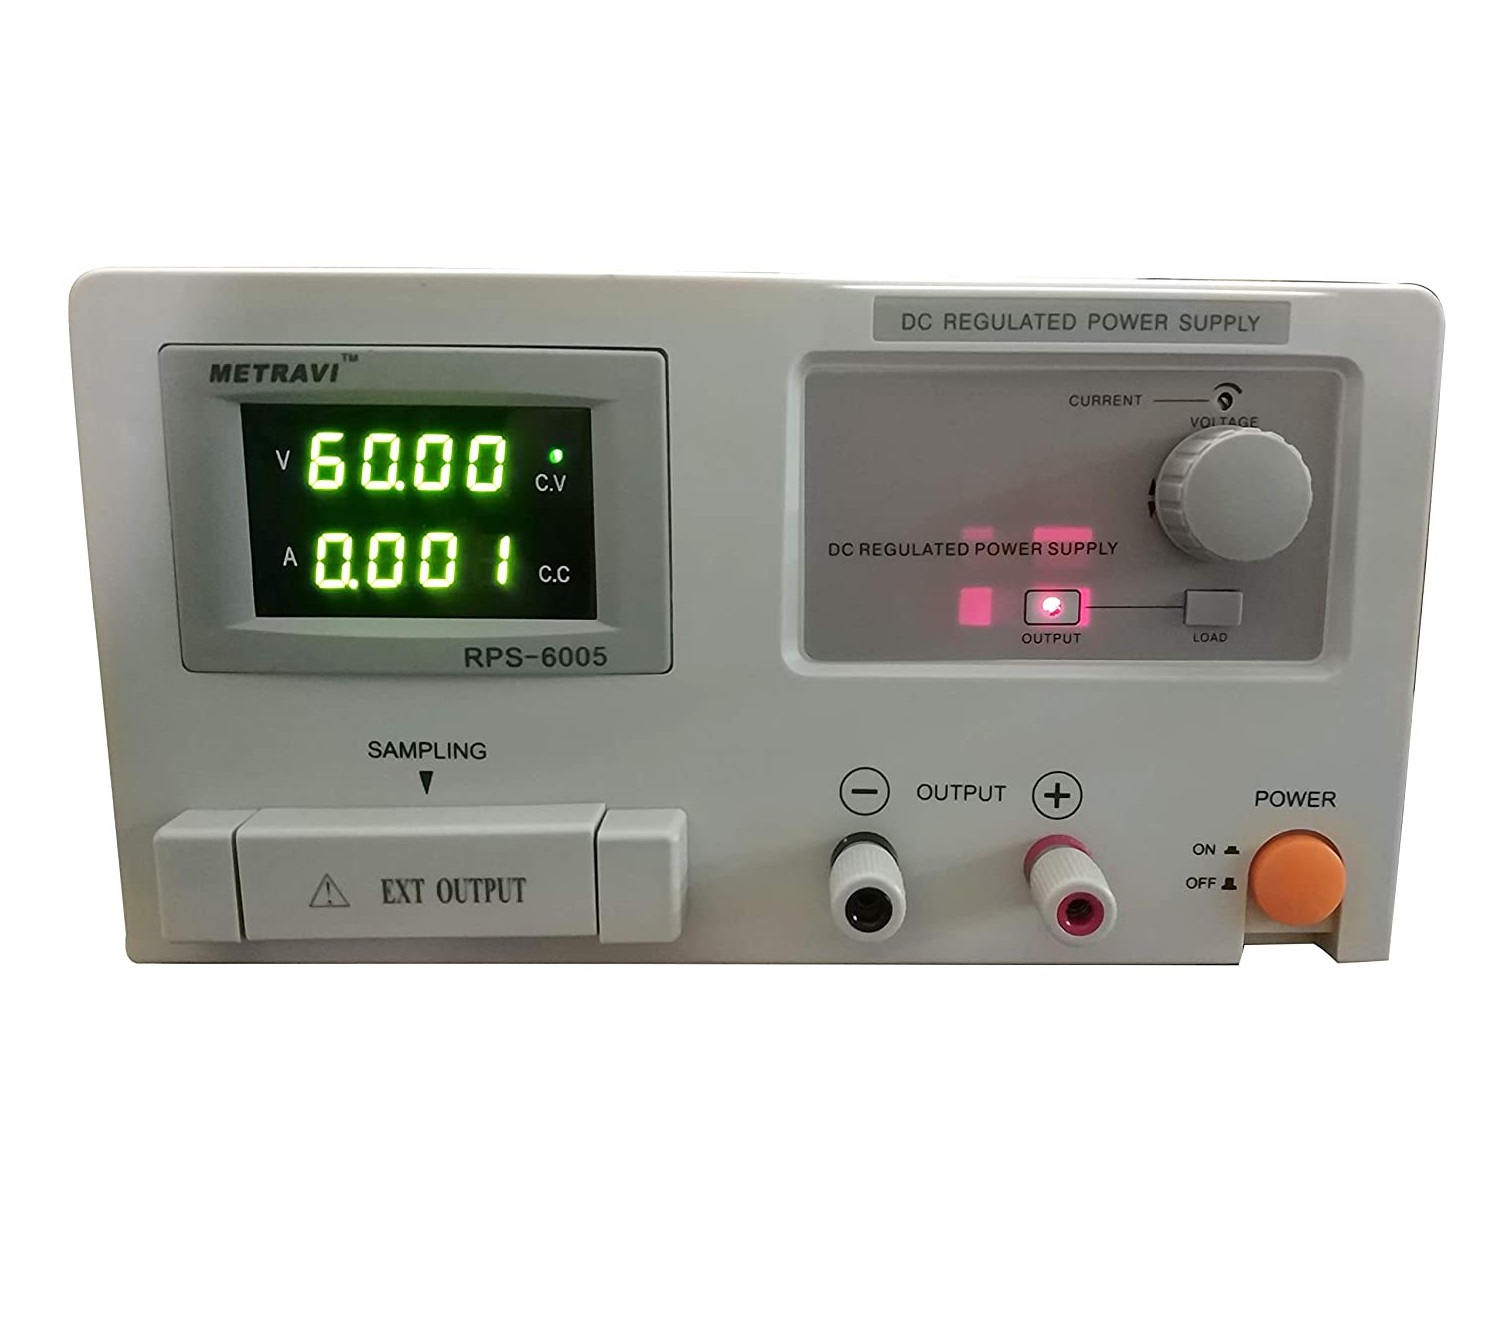 Metravi RPS-6005 DC Regulated Power Supply - Single Output with Backlit LCD Display of Variable 0-60V / 0-5A DC